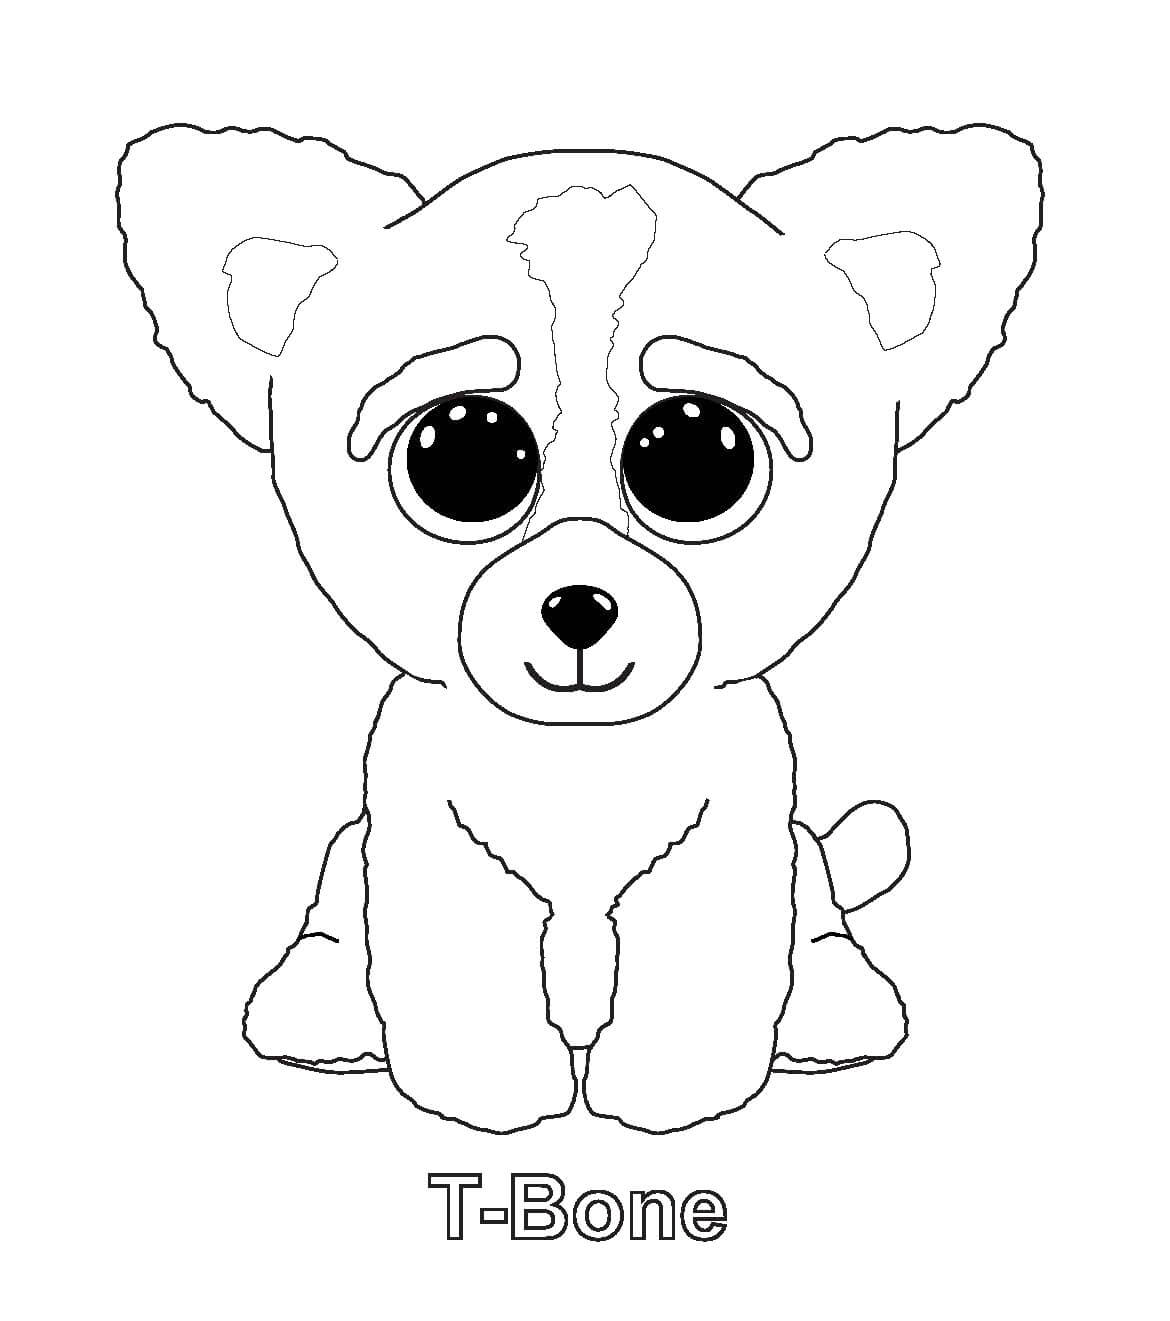 Tbone - Beanie Boo Coloring Pages